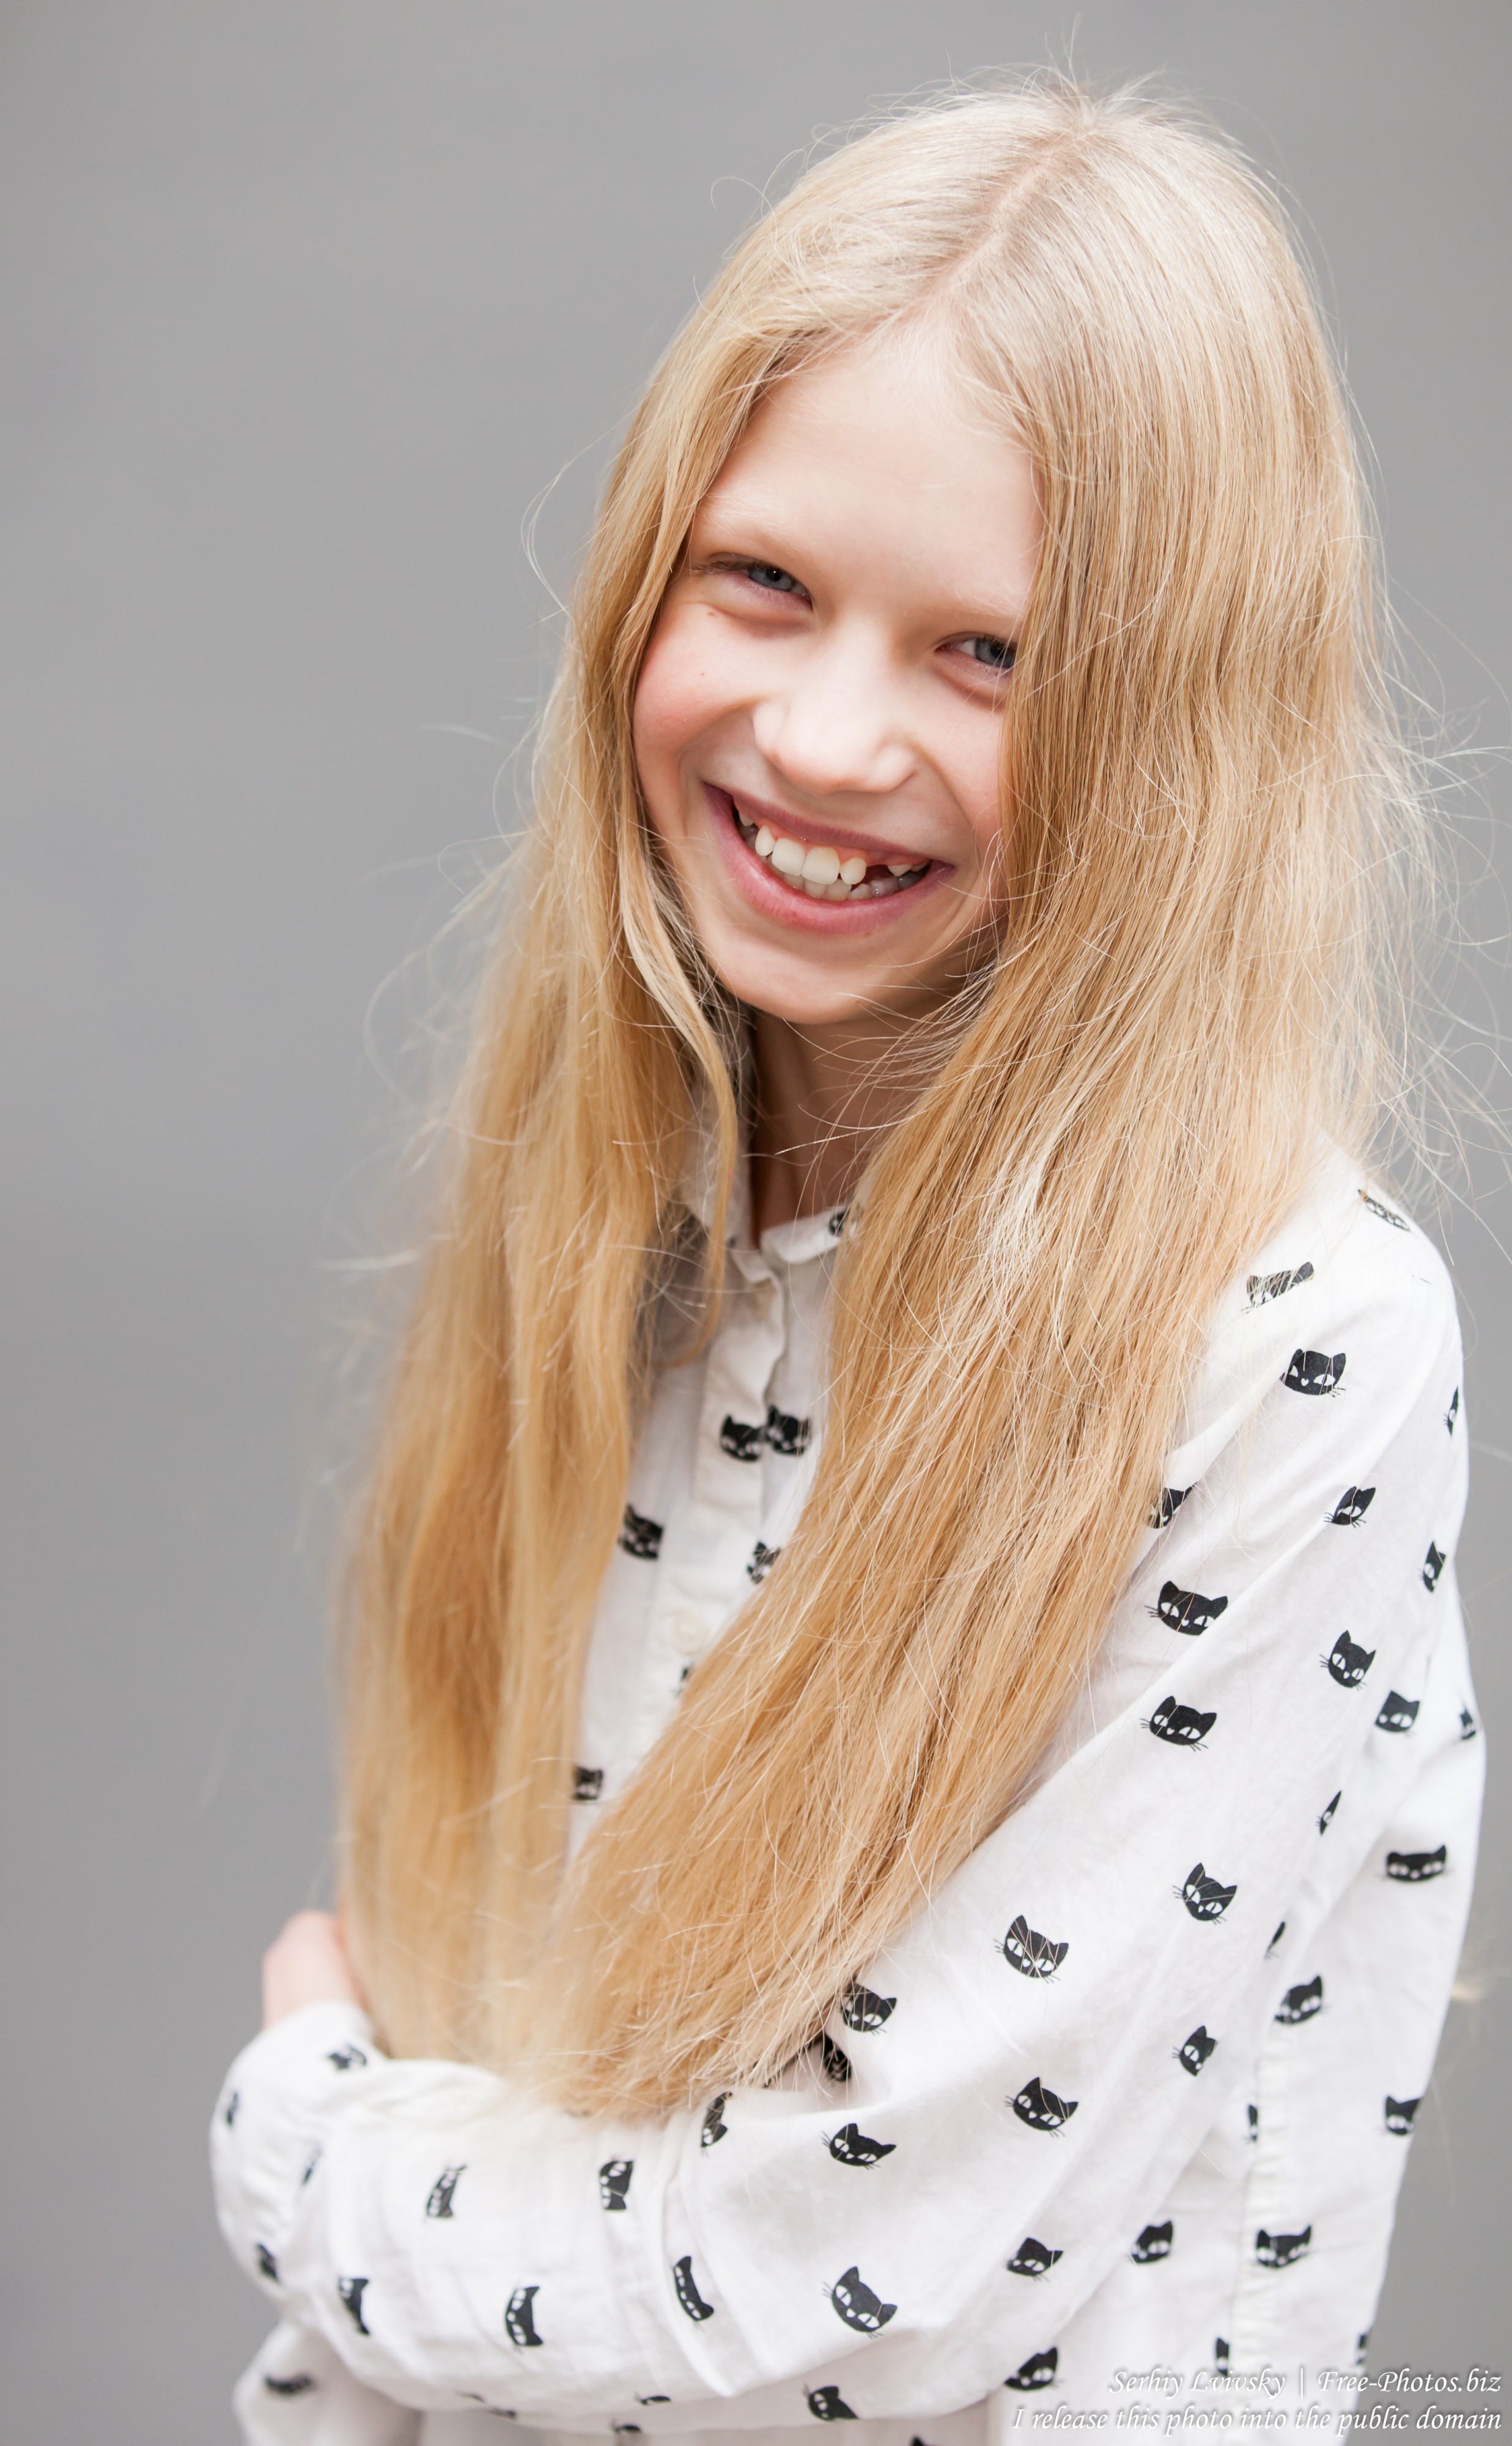 a 12-year-old natural blond Catholic girl photographed by Serhiy Lvivsky in November 2015, picture 3